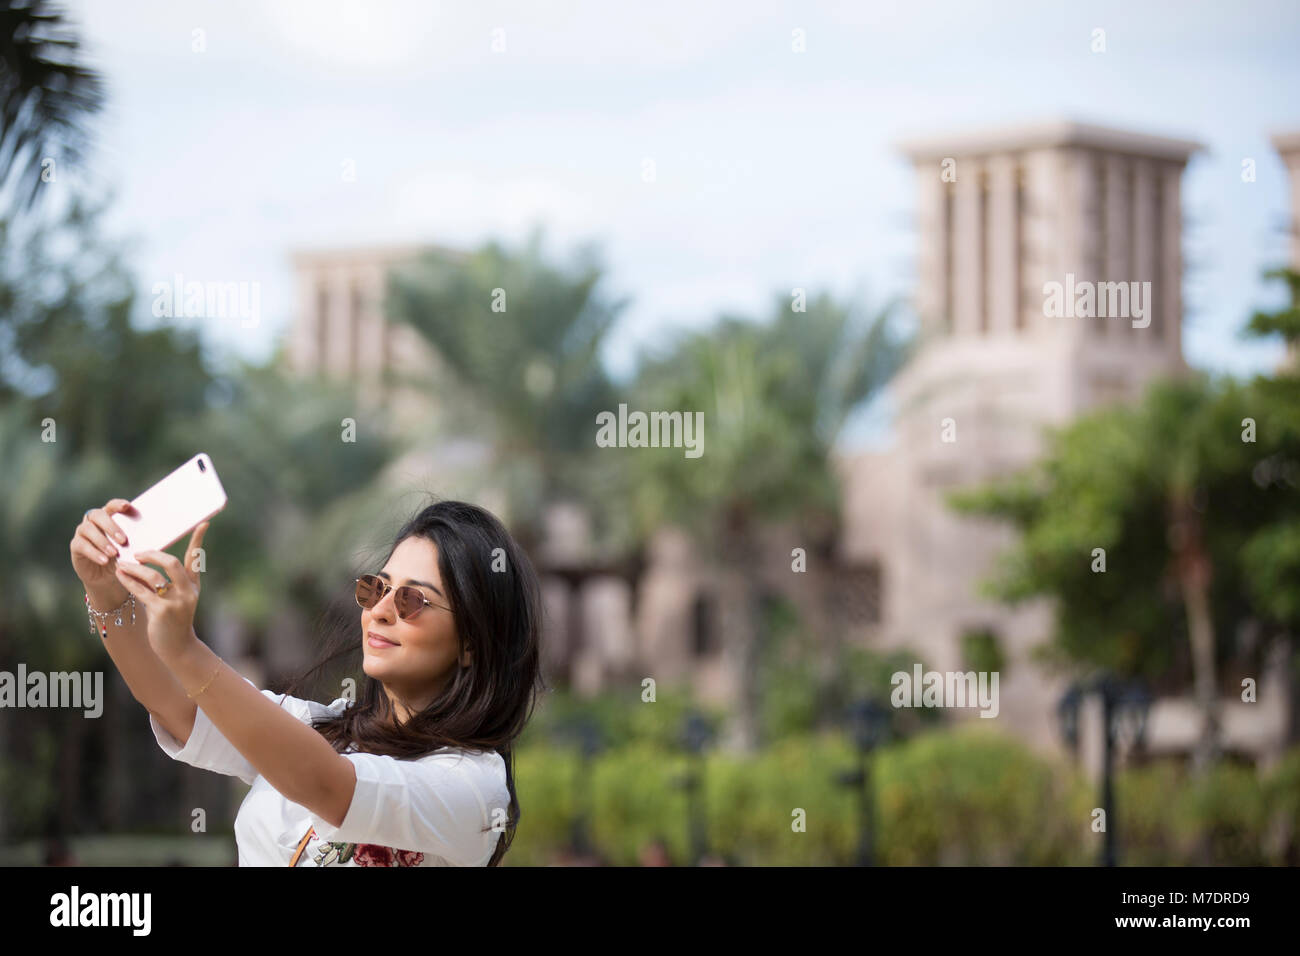 Beautiful woman taking a selfie picture with a mobile phone at Madinat Jumeirah Dubai UAE Stock Photo